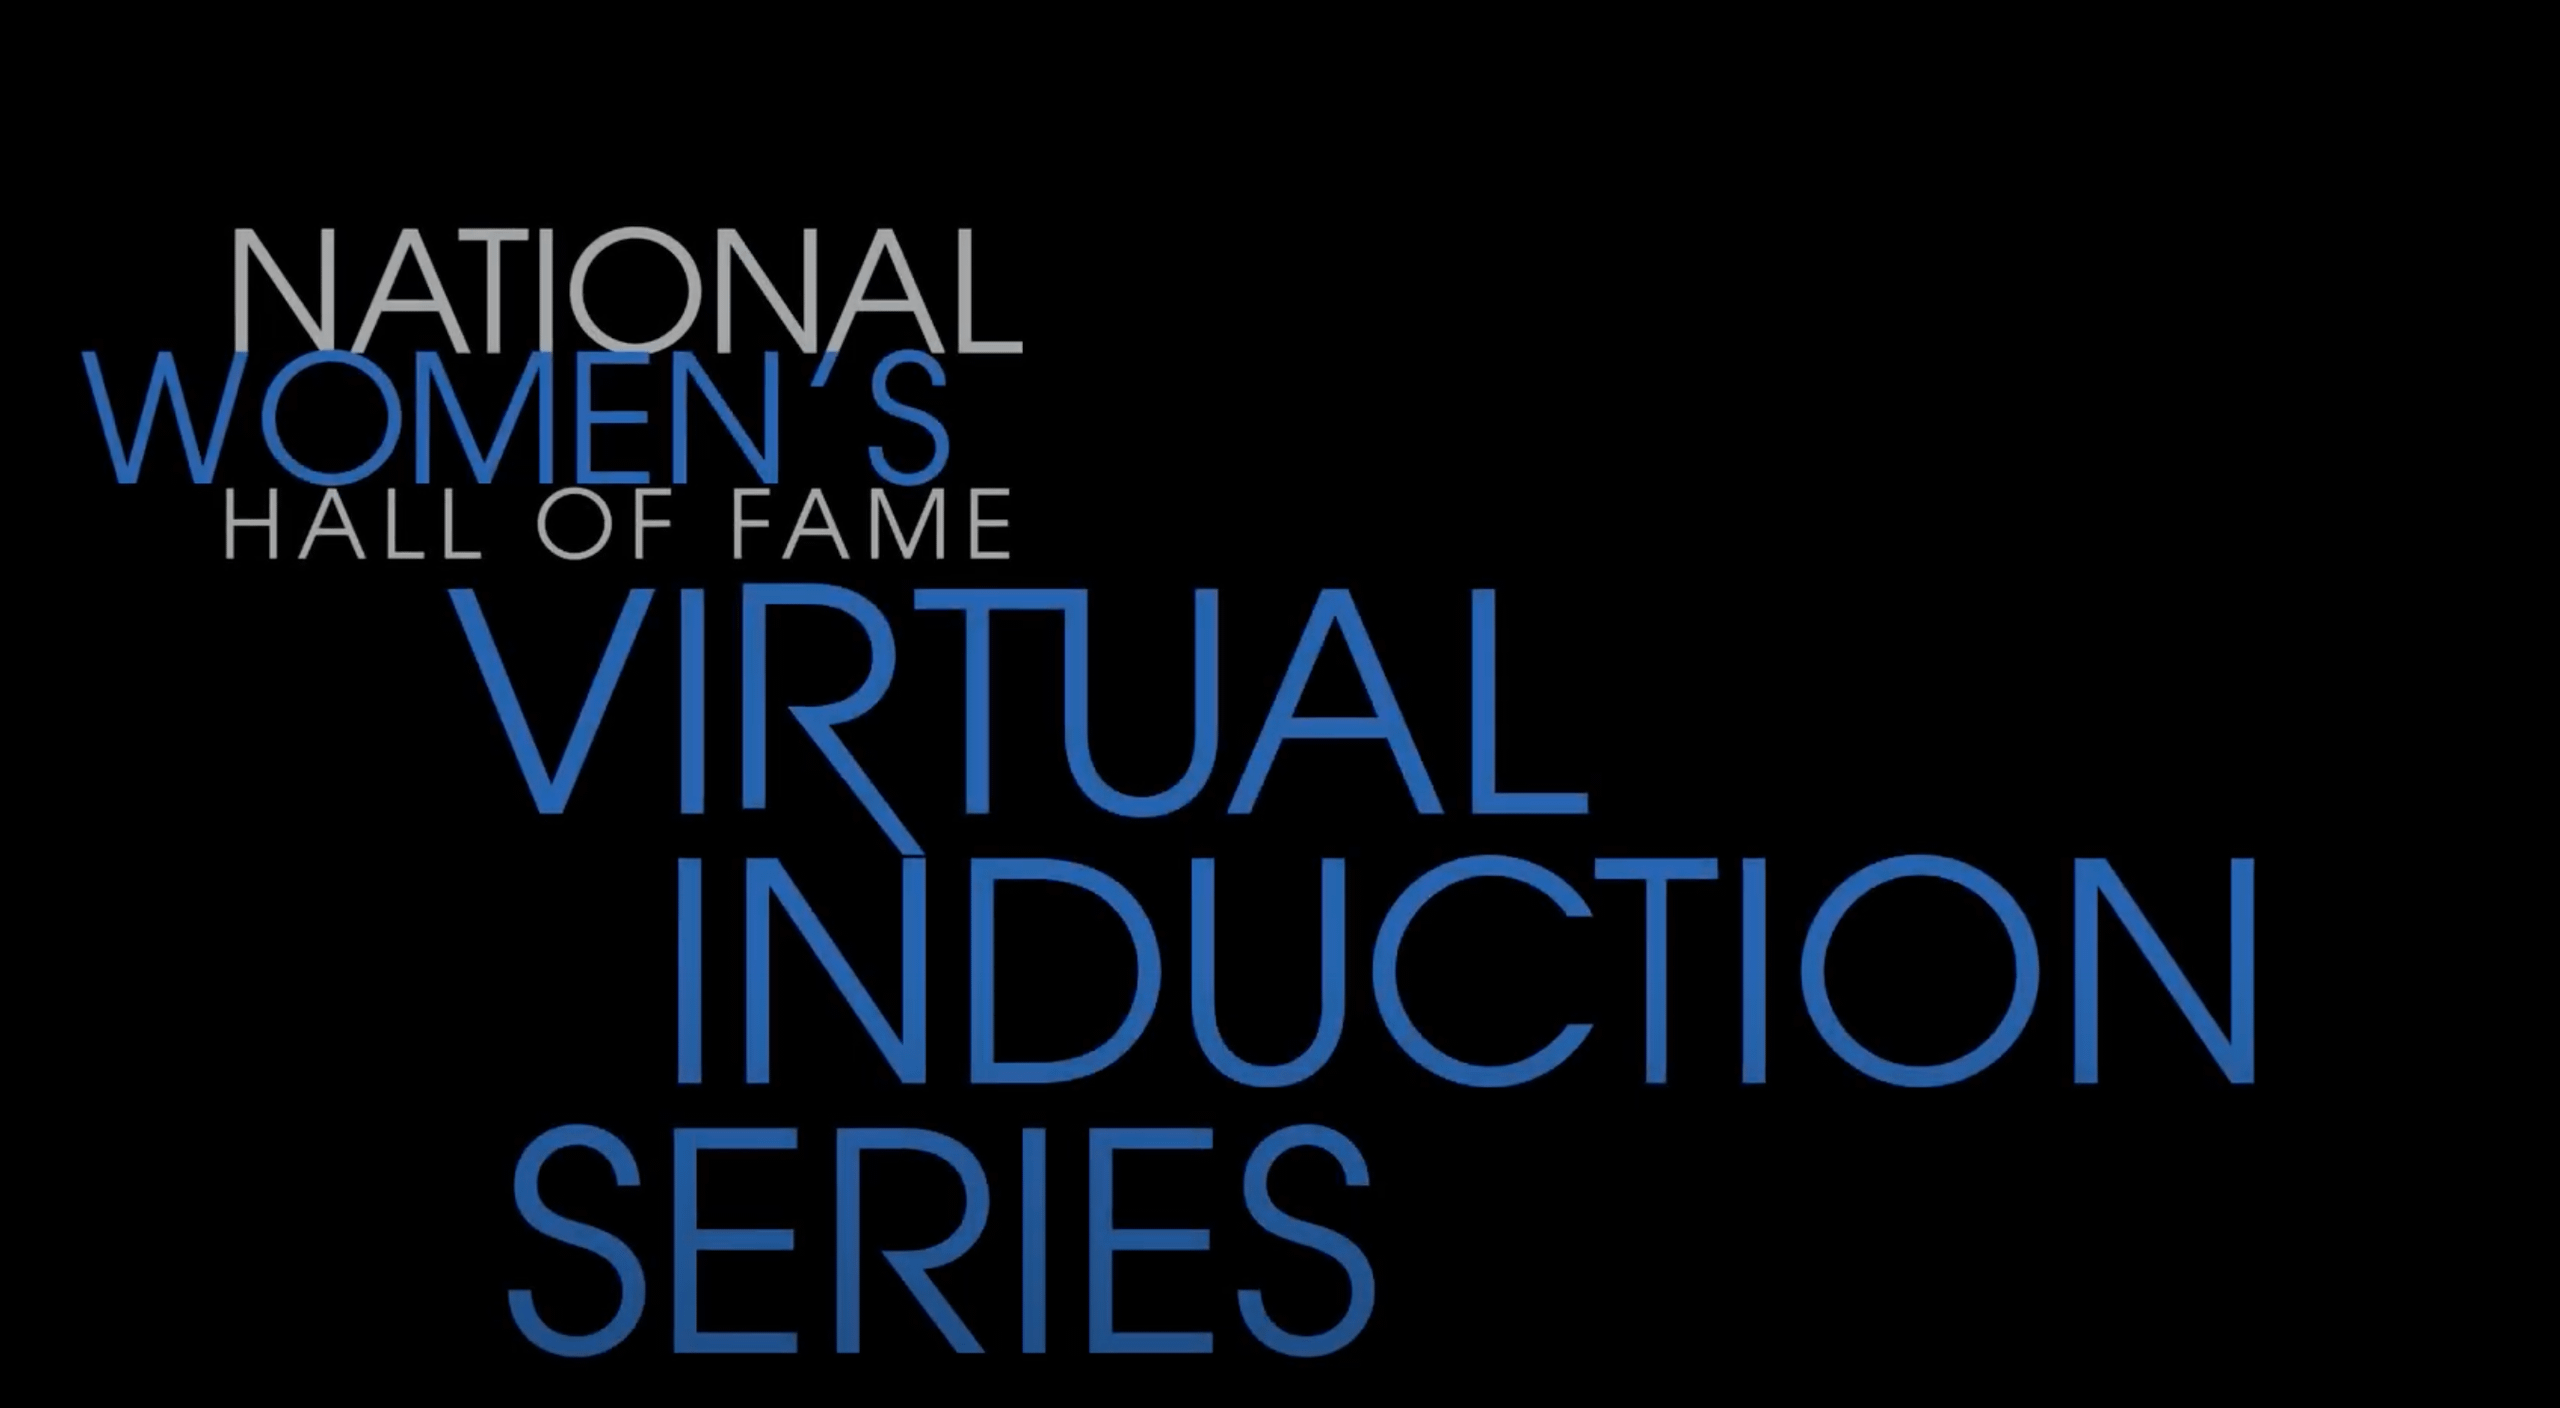 National Women’s Hall of Fame 2020 Virtual Induction Ceremony Thumbnail